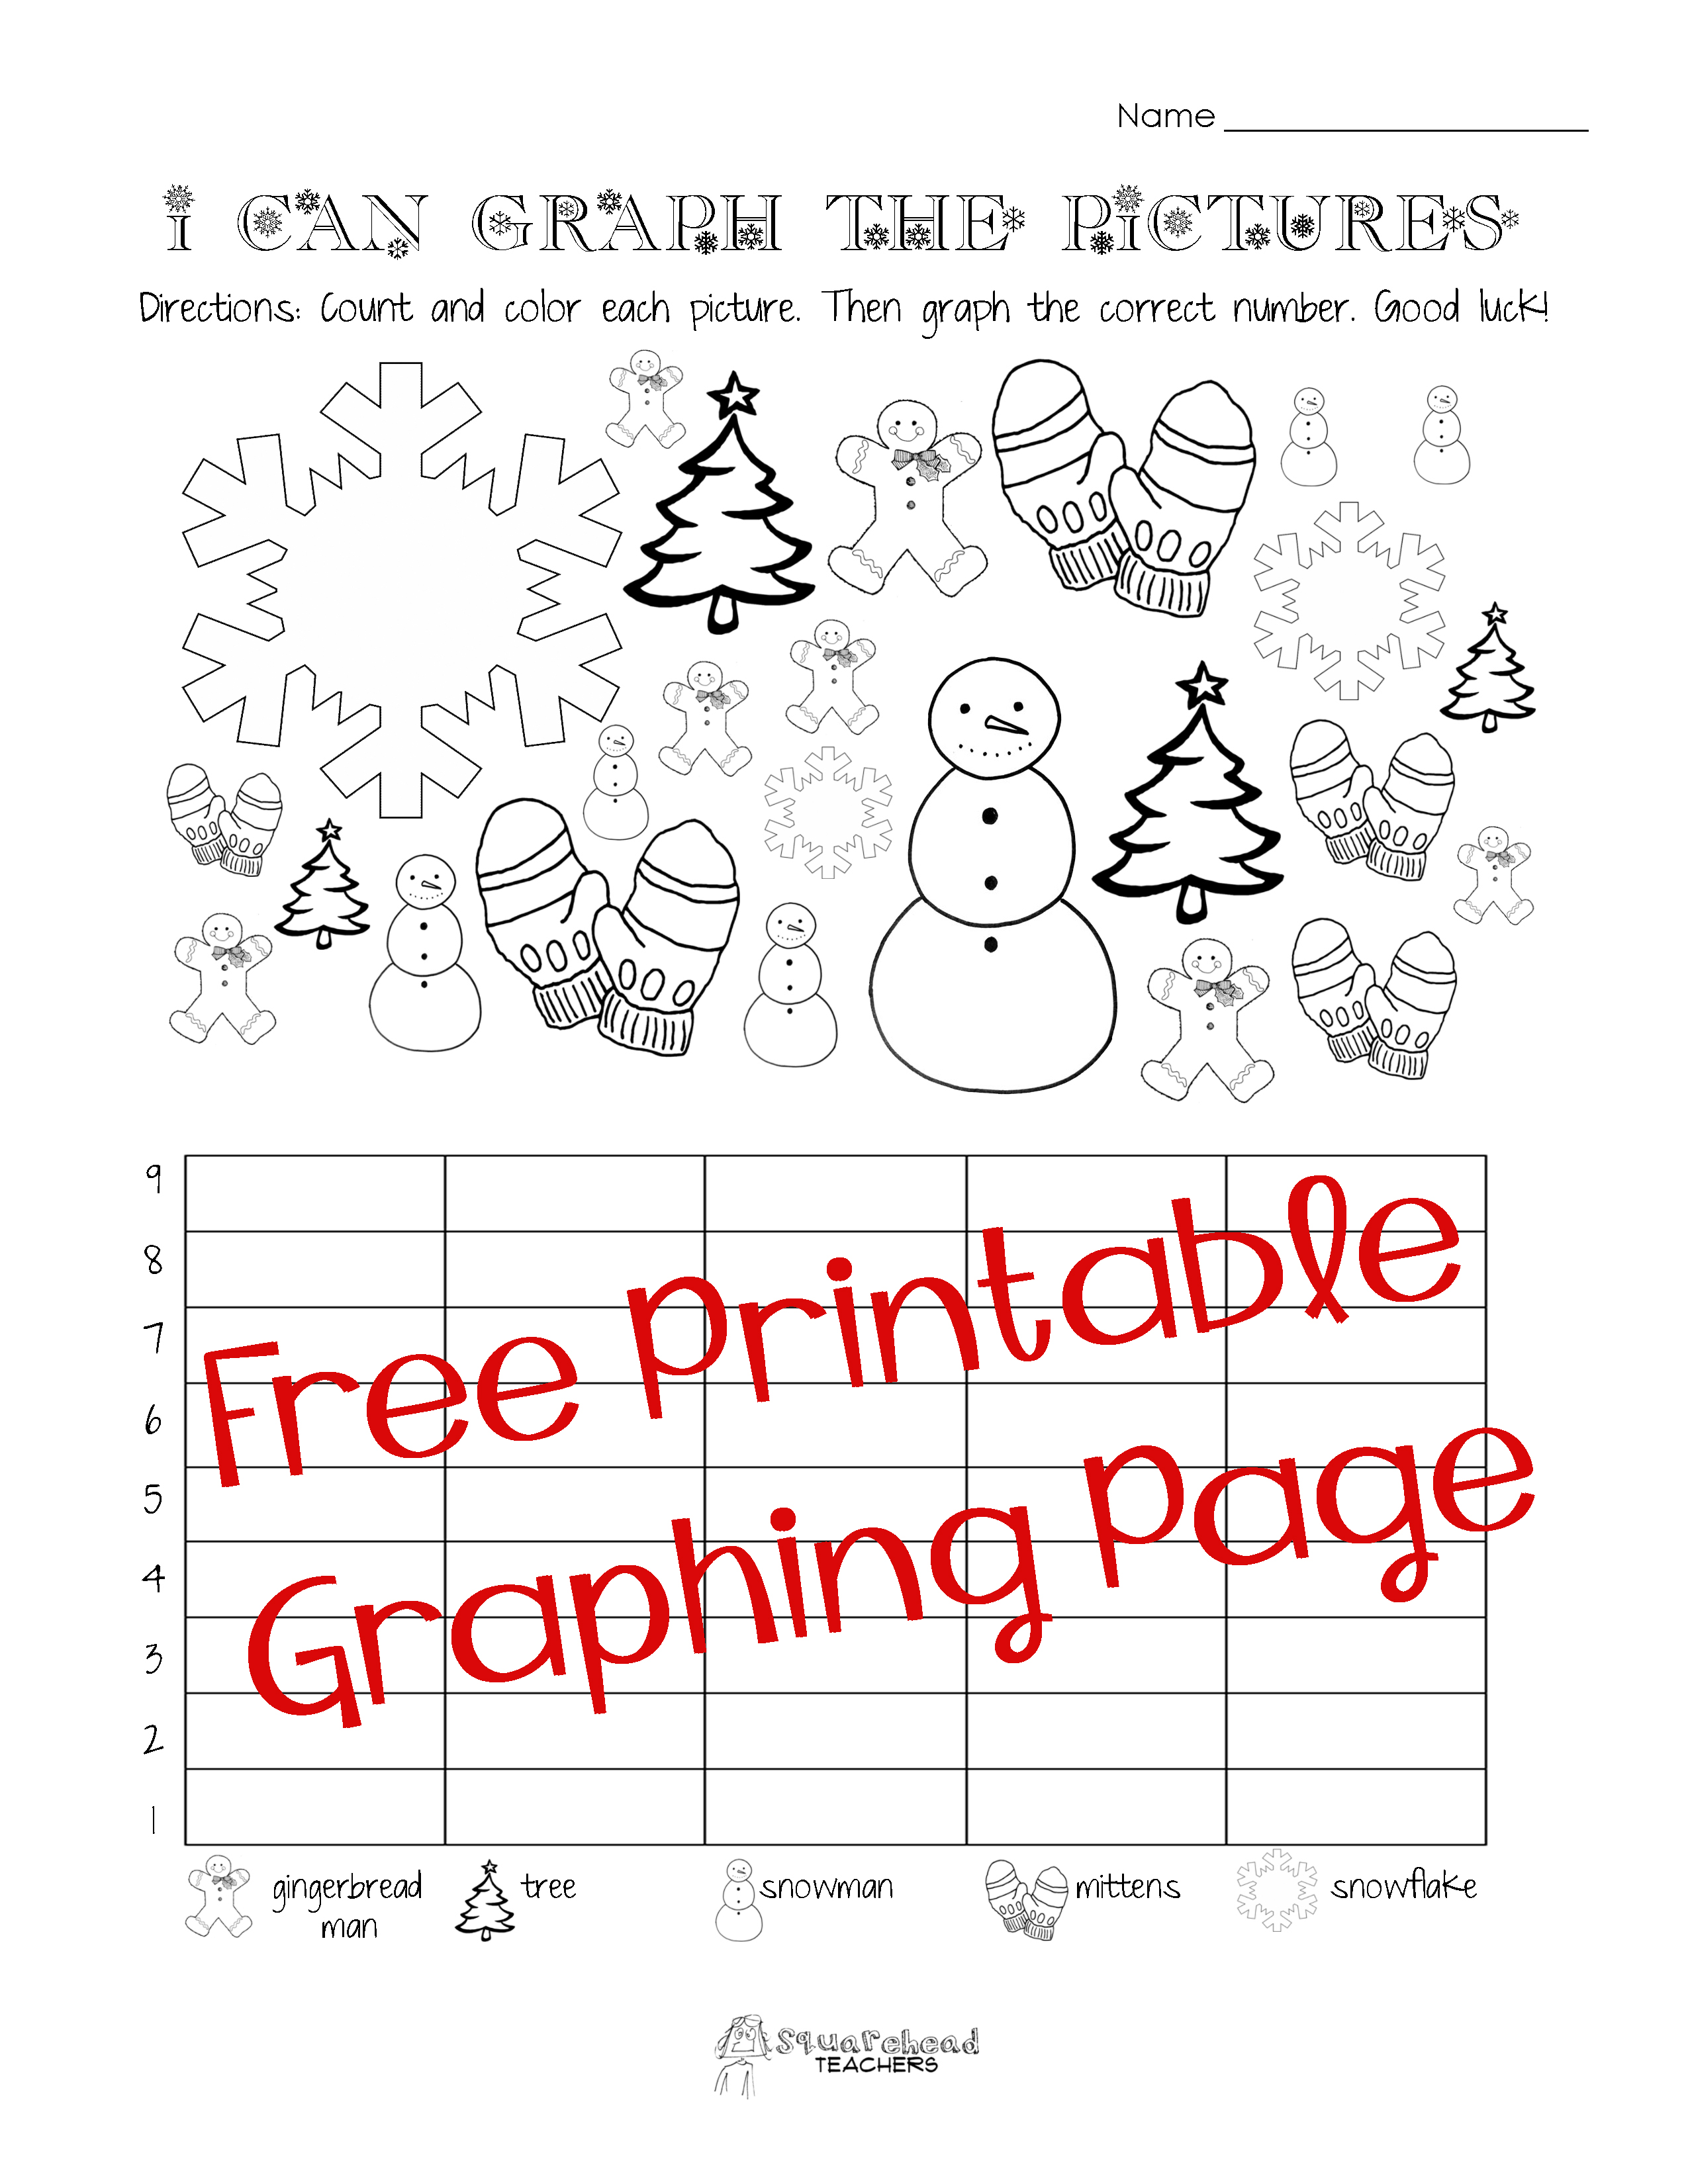 graphing-worksheets-for-kindergarten-printable-word-searches